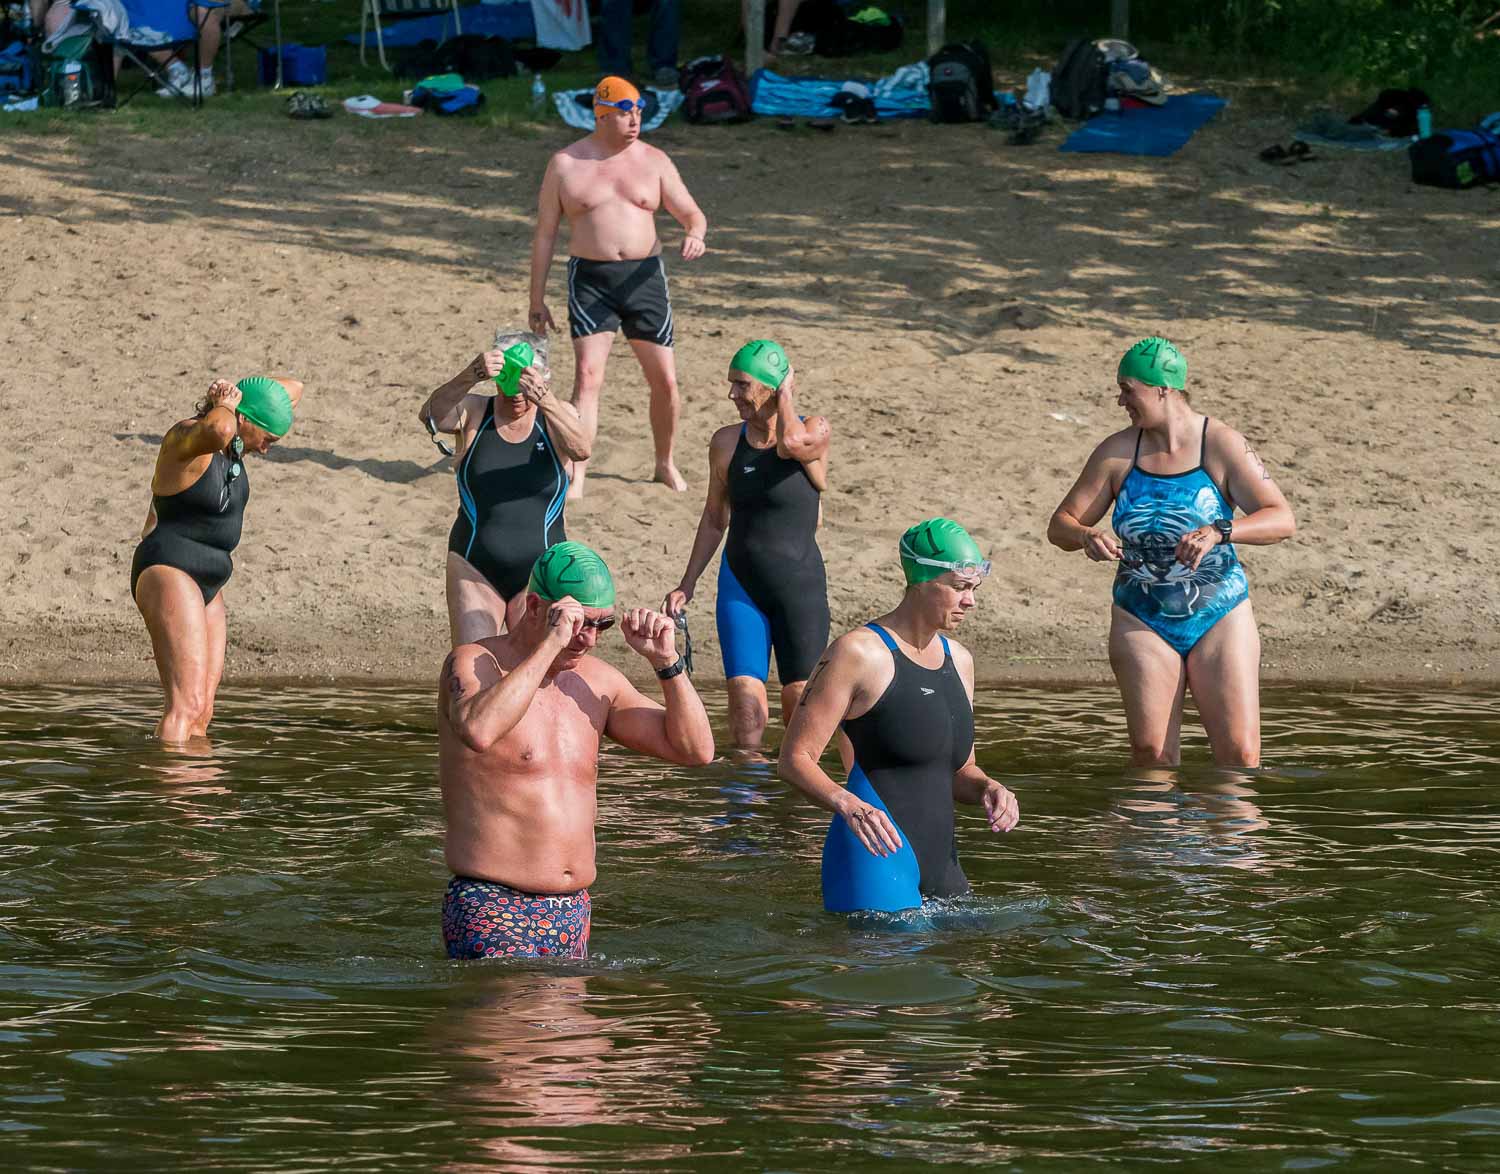 What to Do If You Become Stressed or Nervous During an Open Water Swim